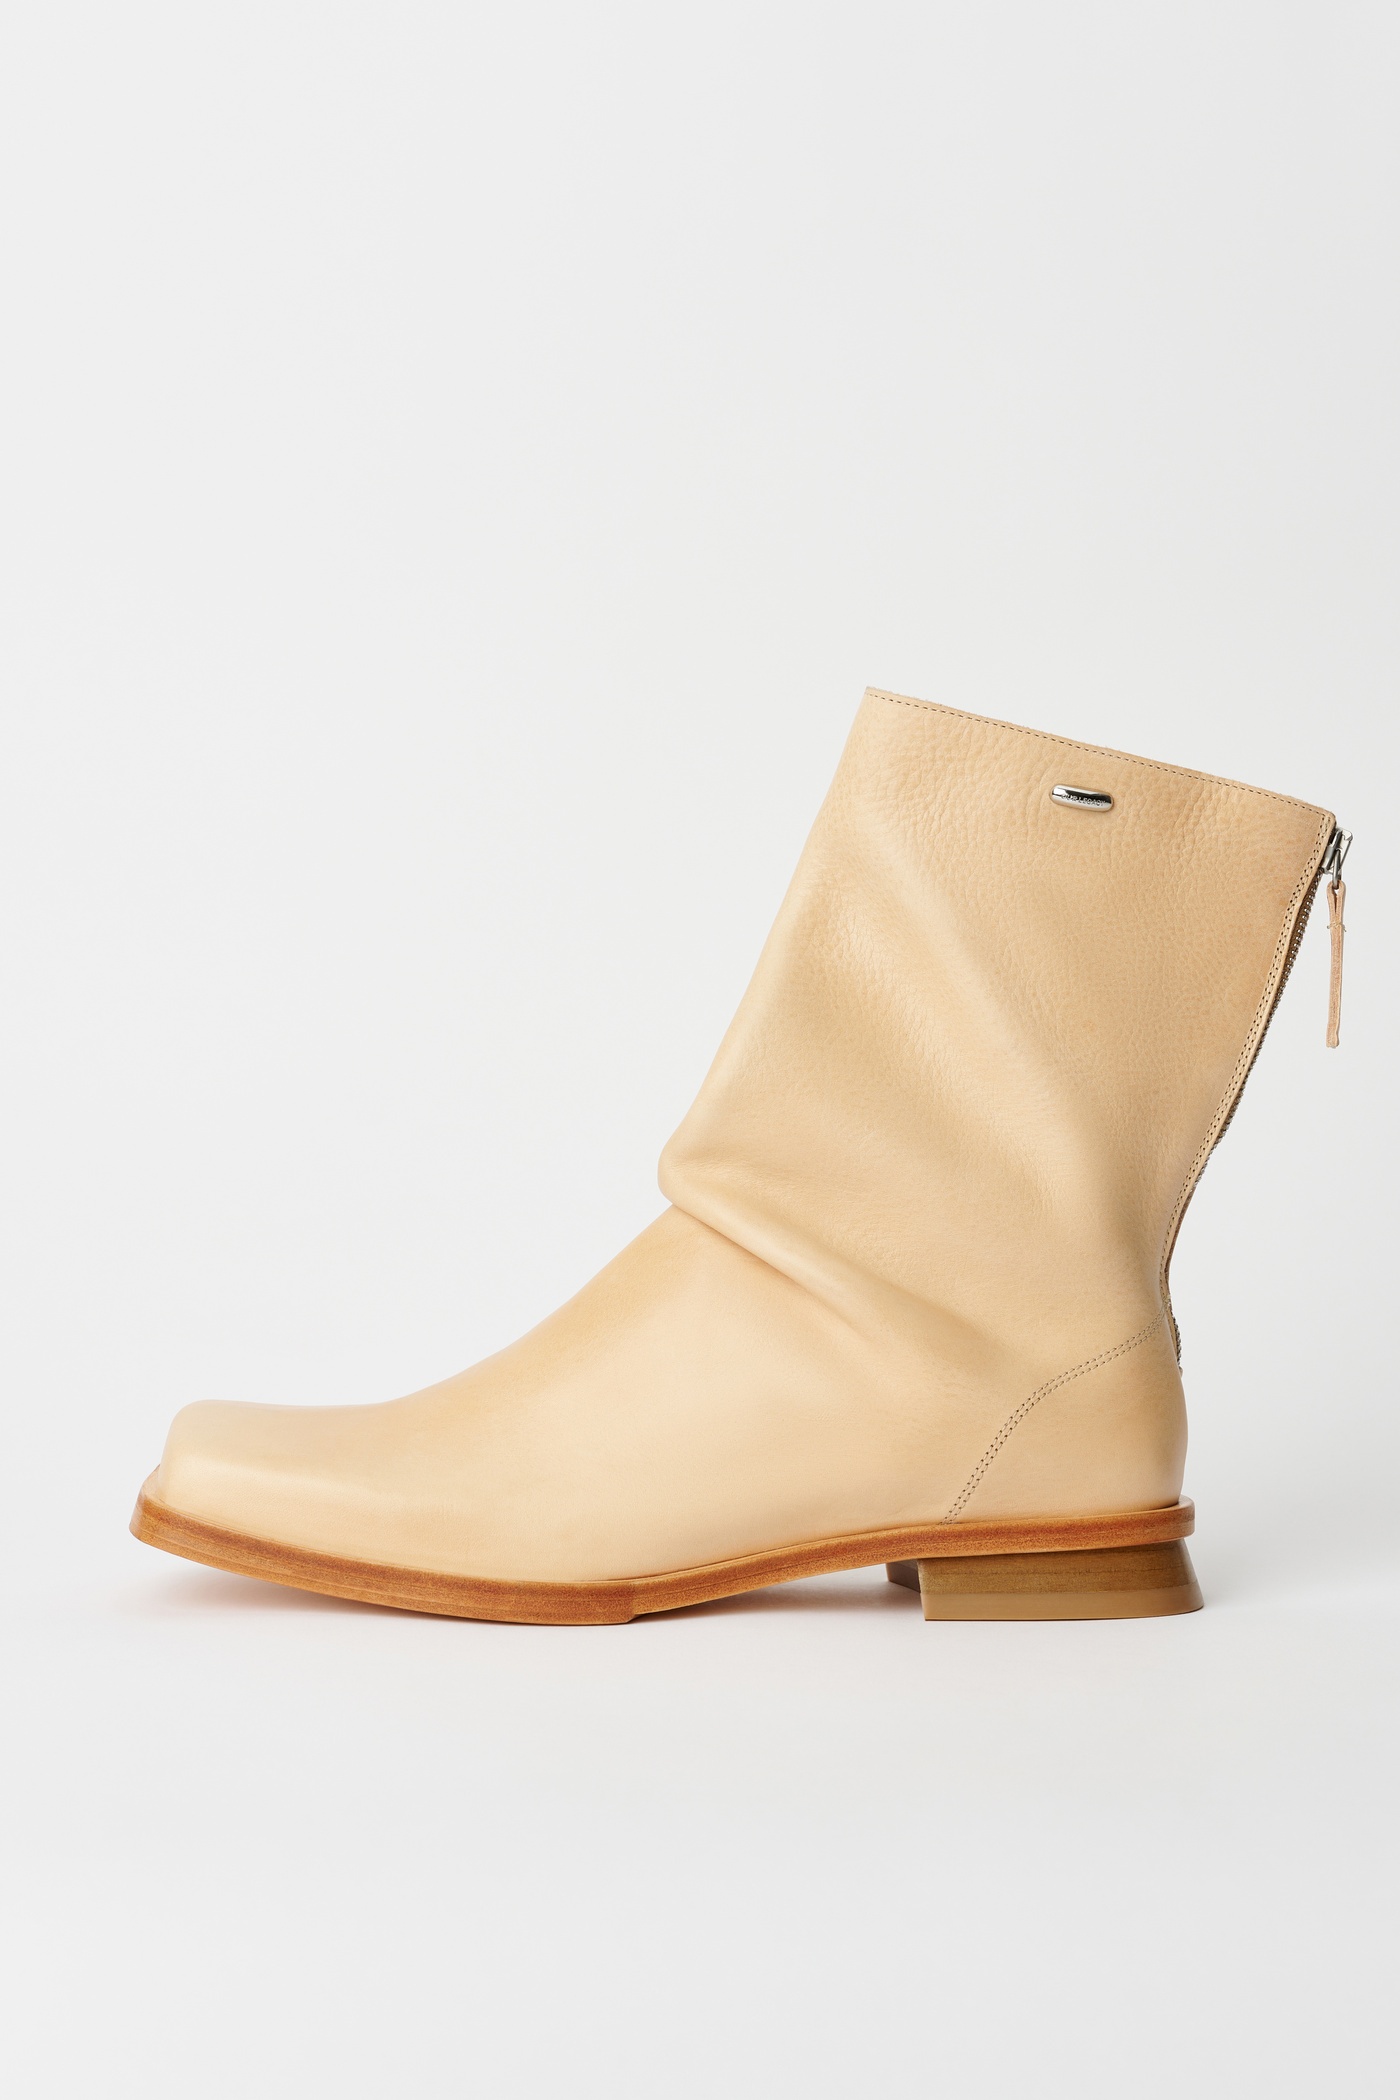 Blunt Boot Natural Tan Leather - 1